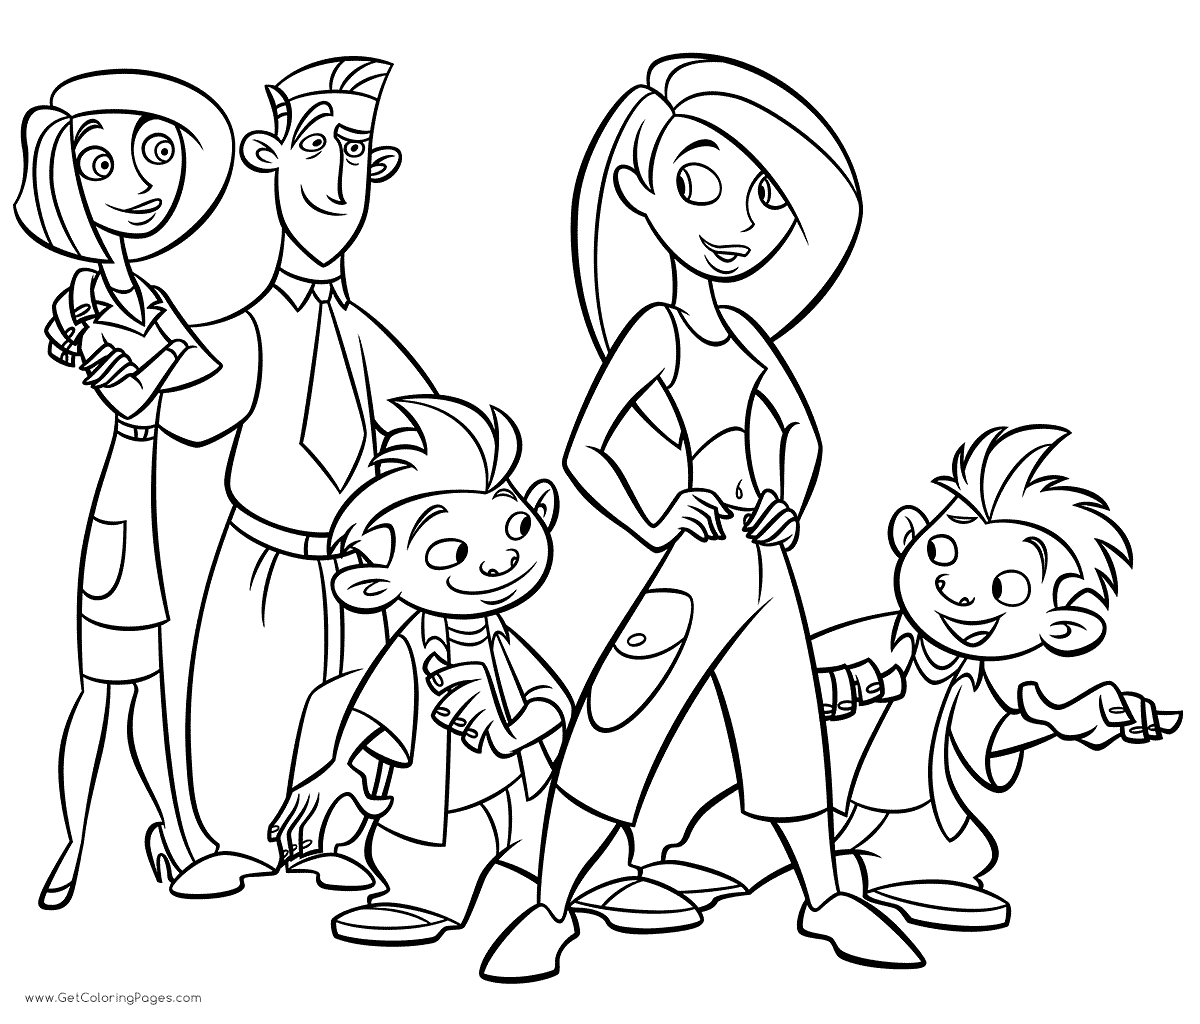 Kim Possible and Family Coloring Page